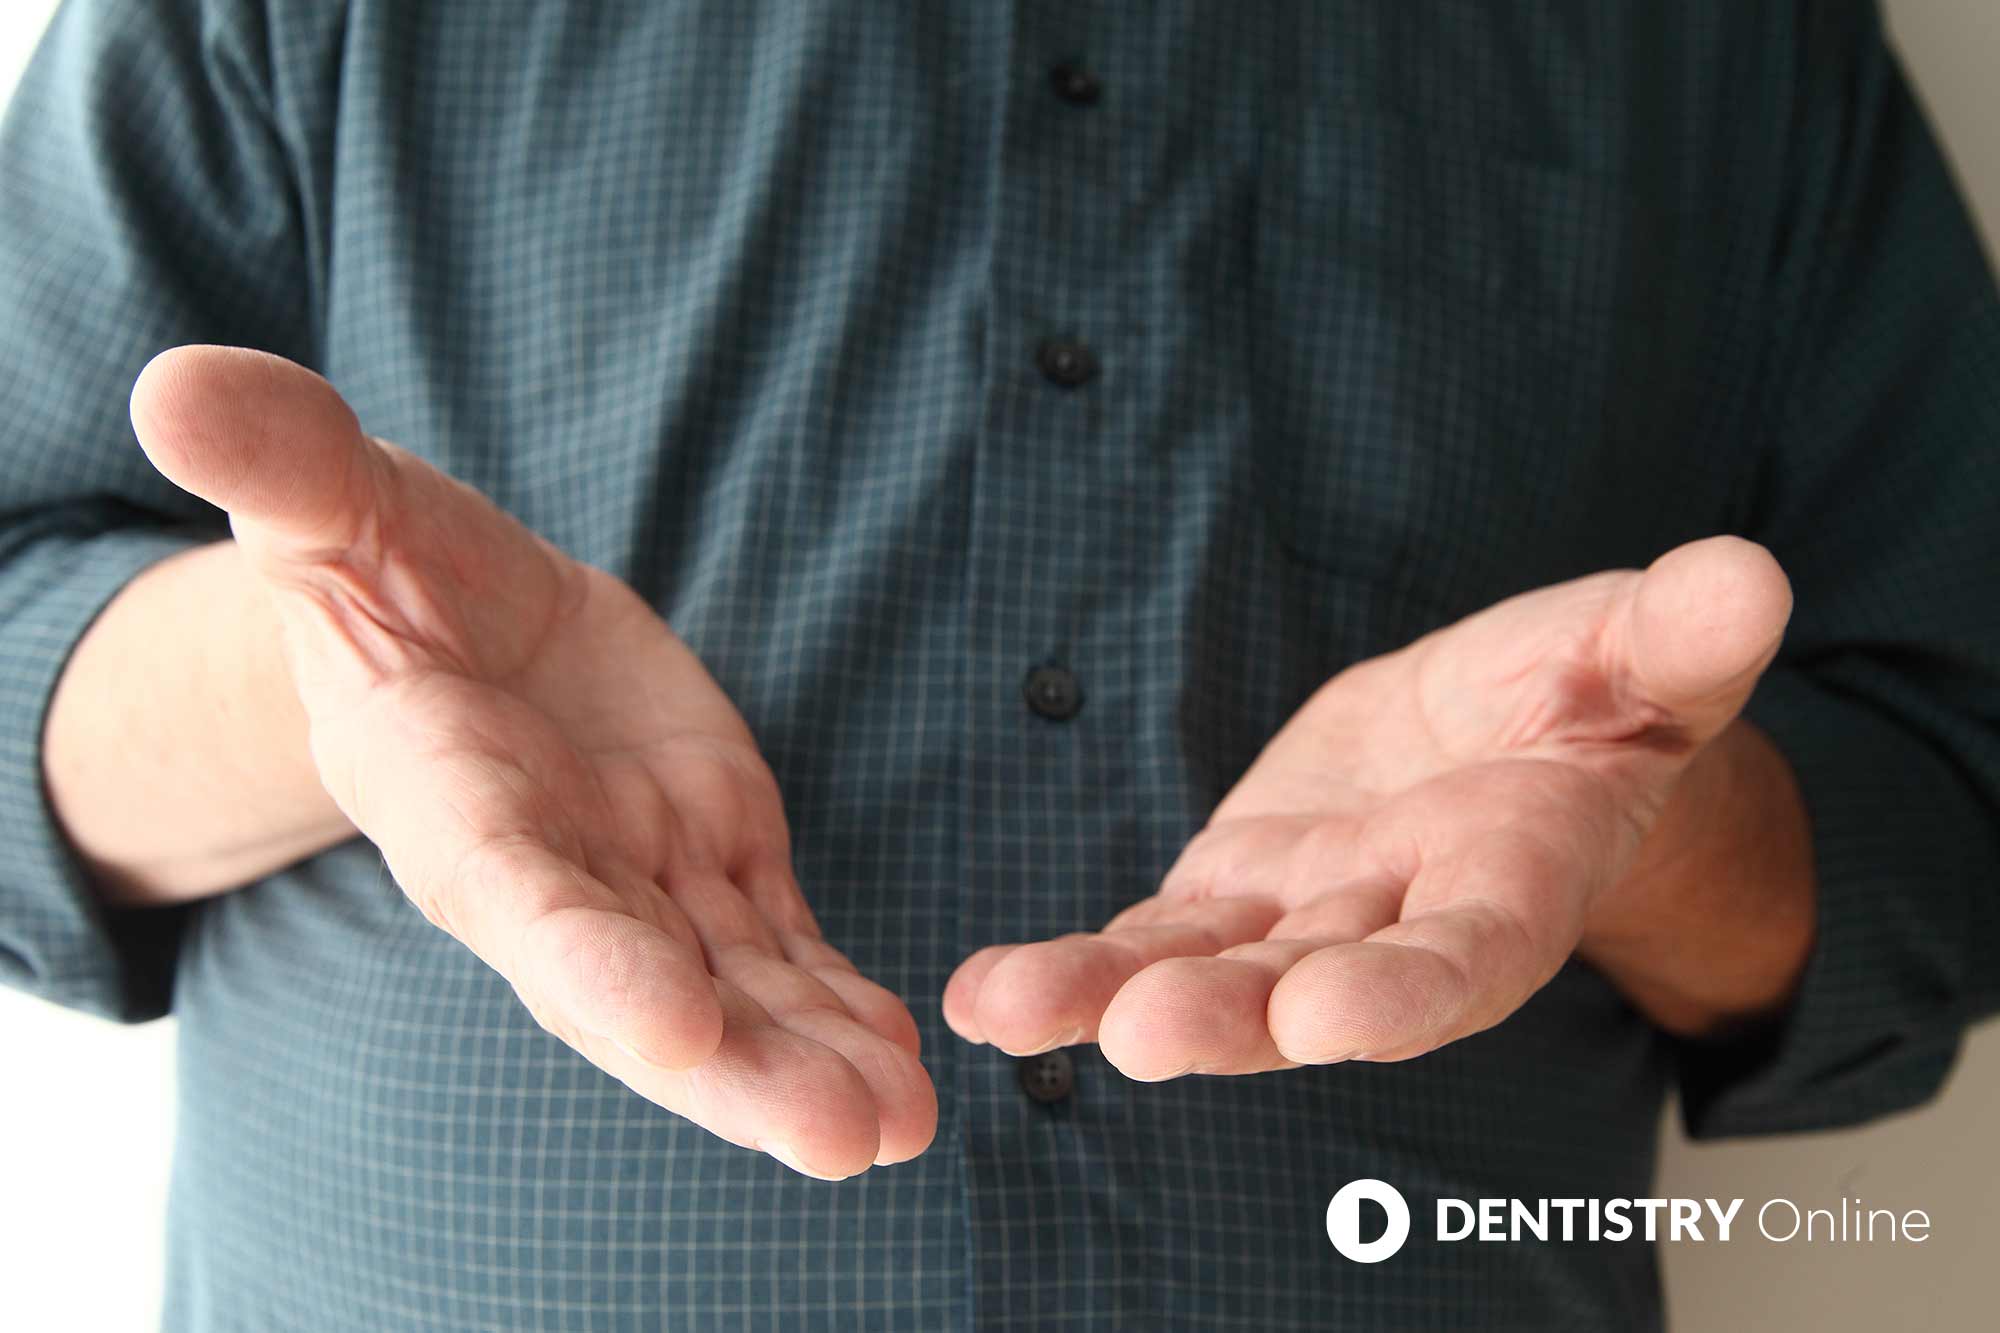 Non-verbal communication in the dental practice – Dentistry Online